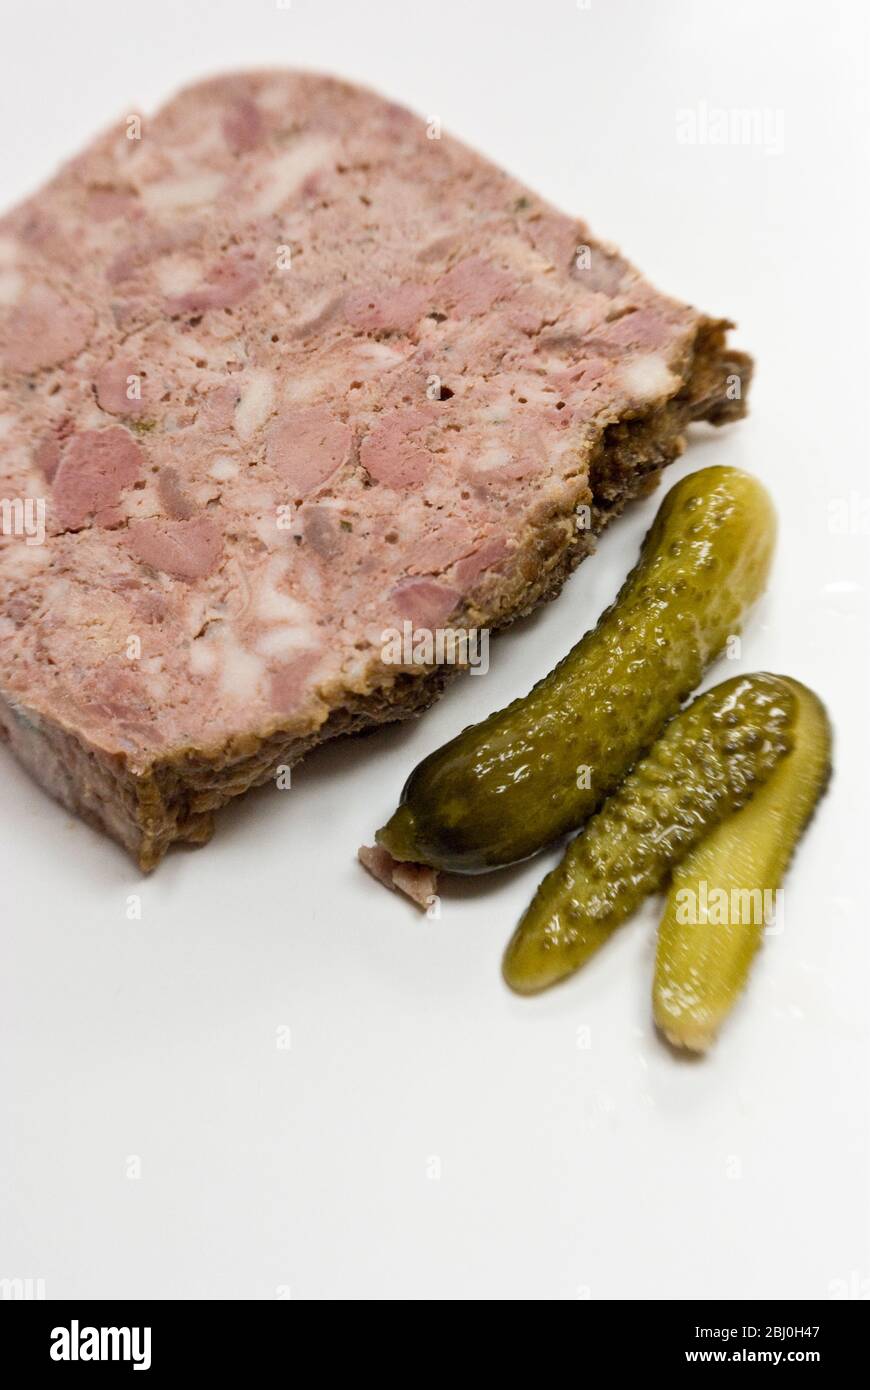 Slice of patŽ de campagne, country patŽ with little cornichon gherkins, on white plate. - Stock Photo